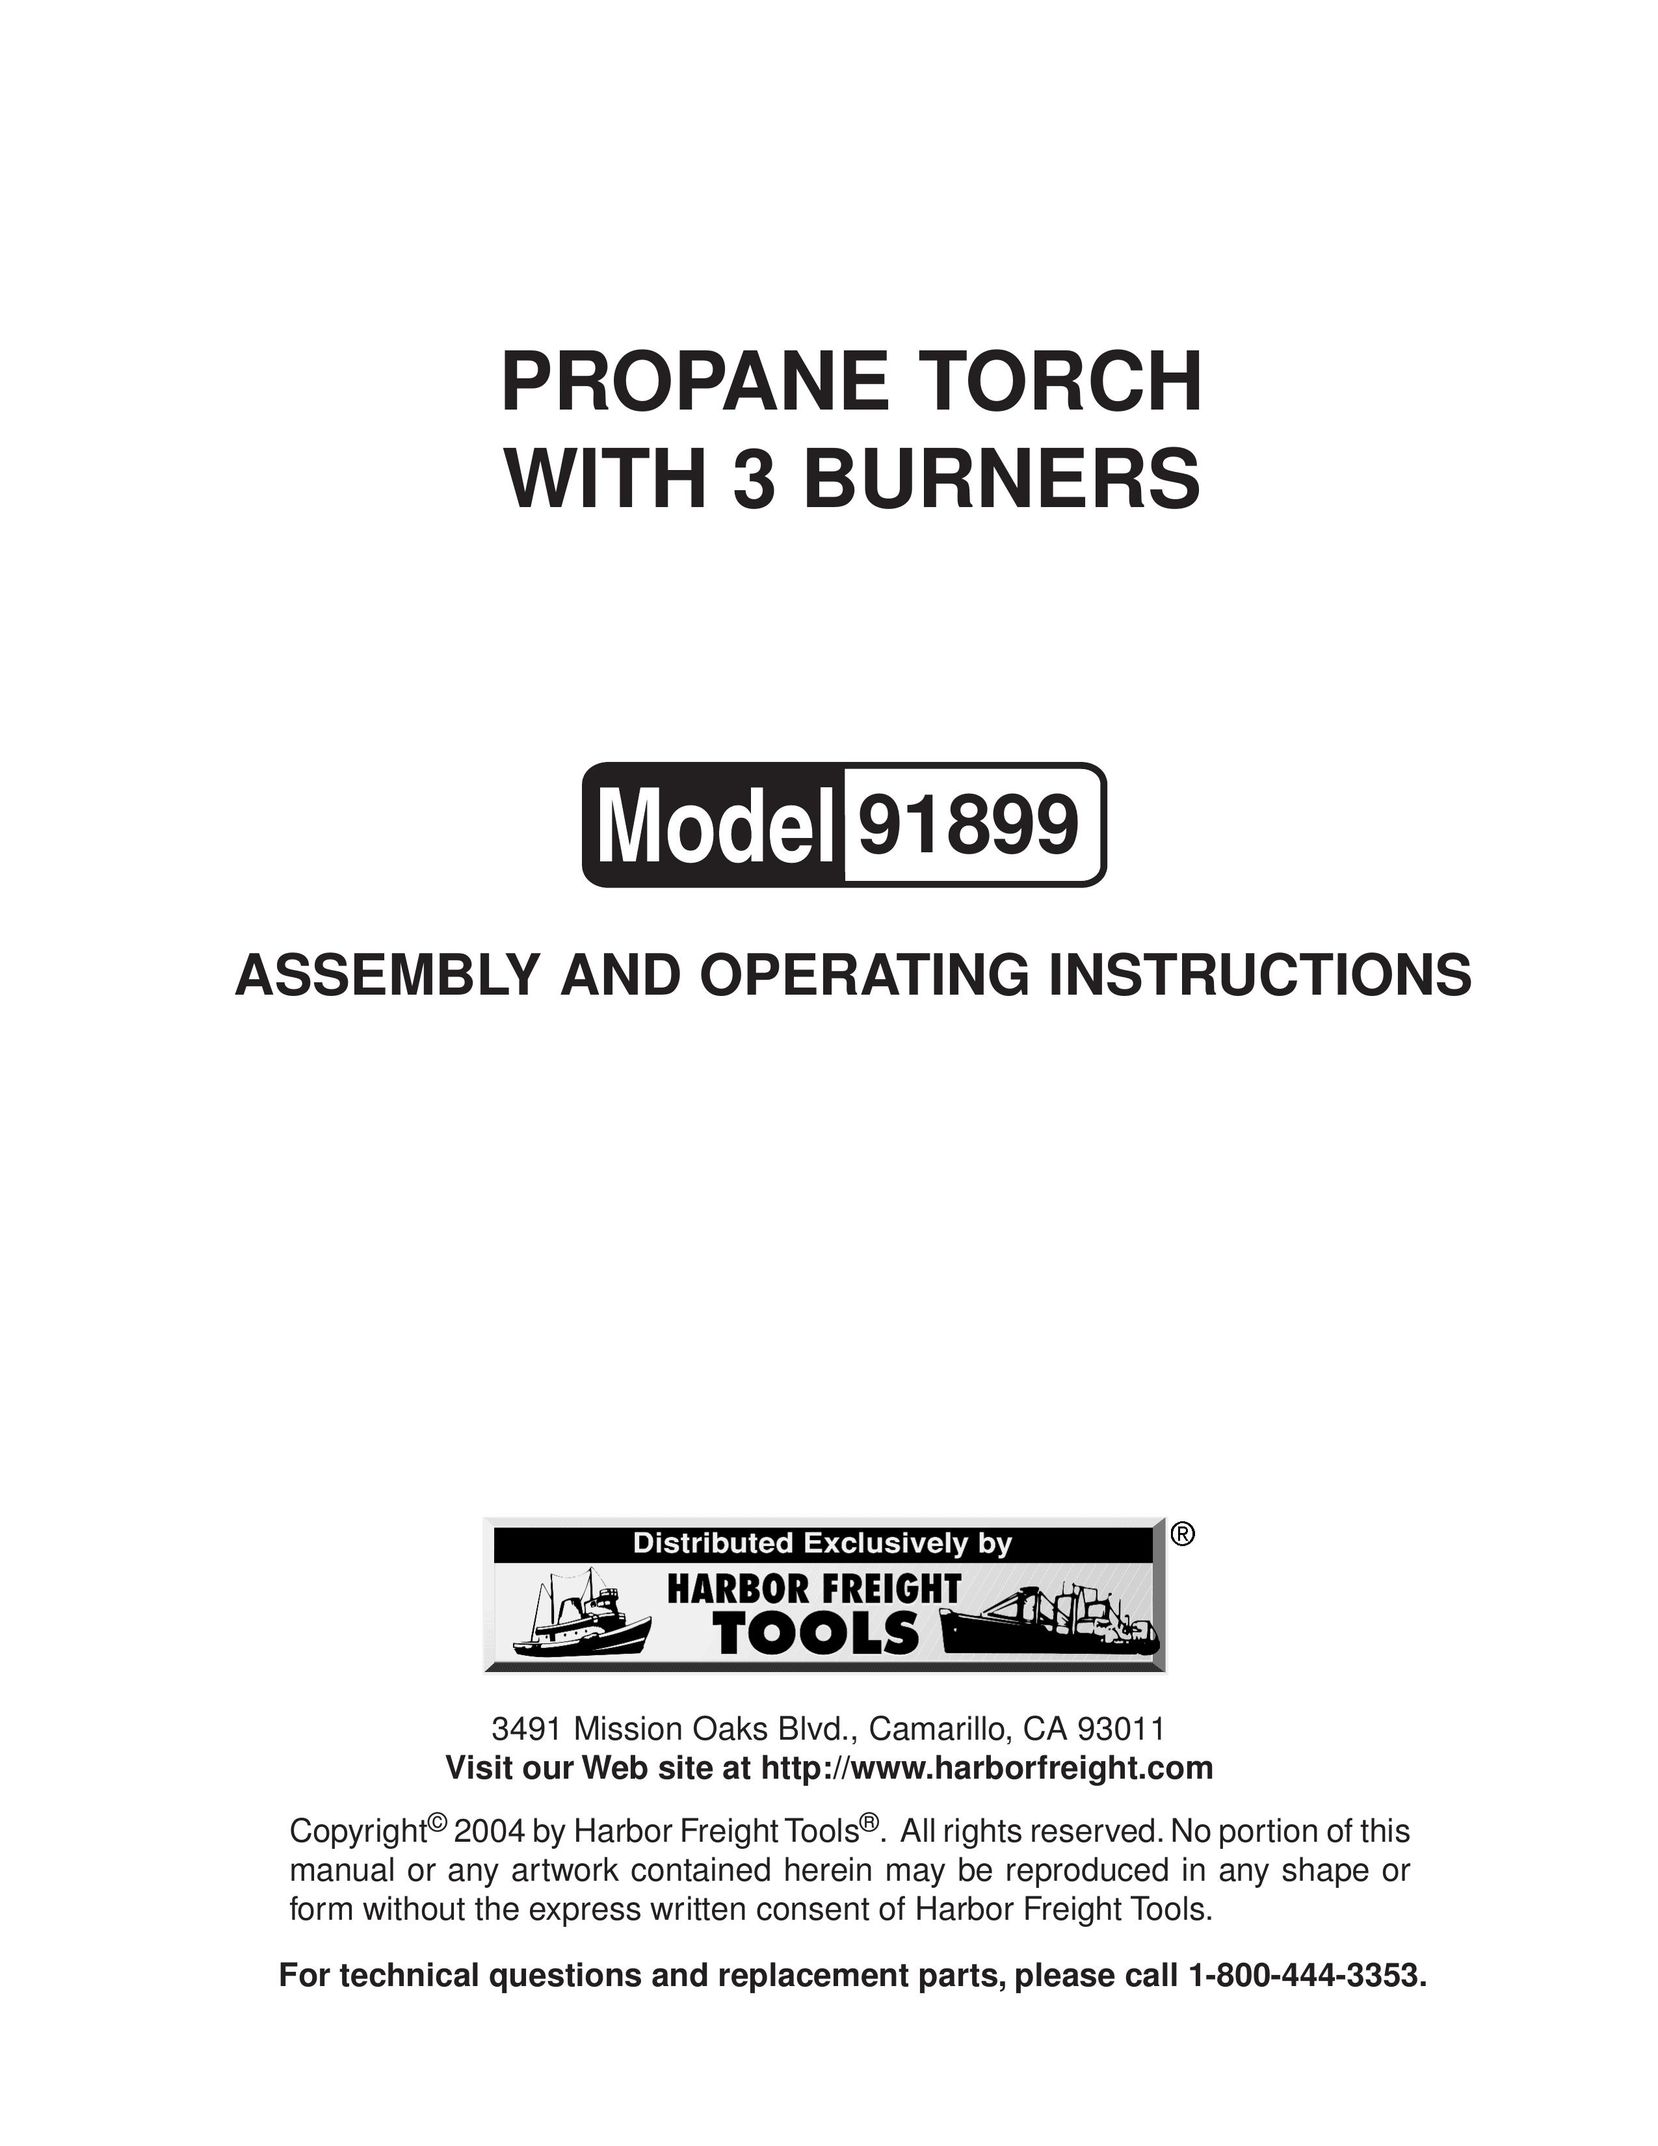 Harbor Freight Tools 91899 Blowtorch User Manual